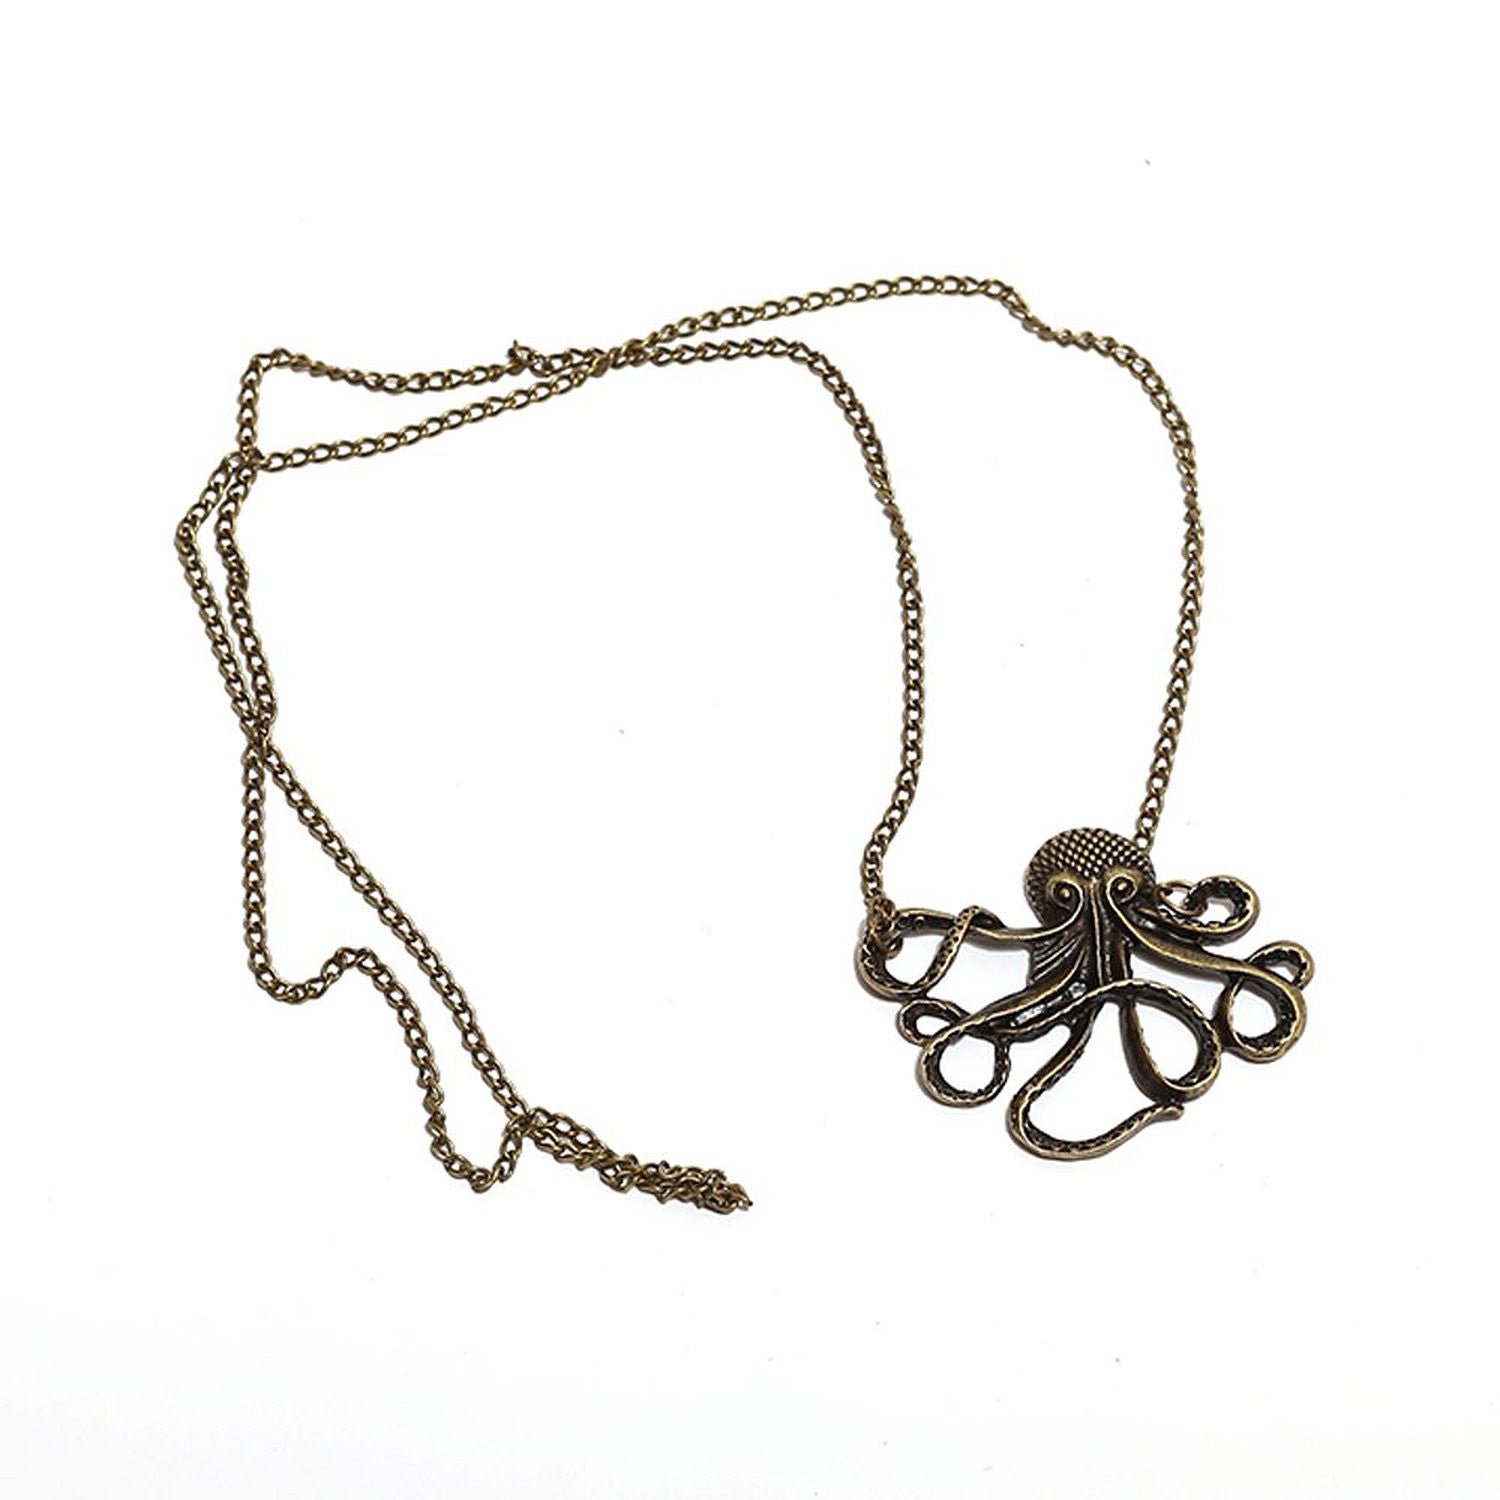 Octopus Necklace - OddGifts.com